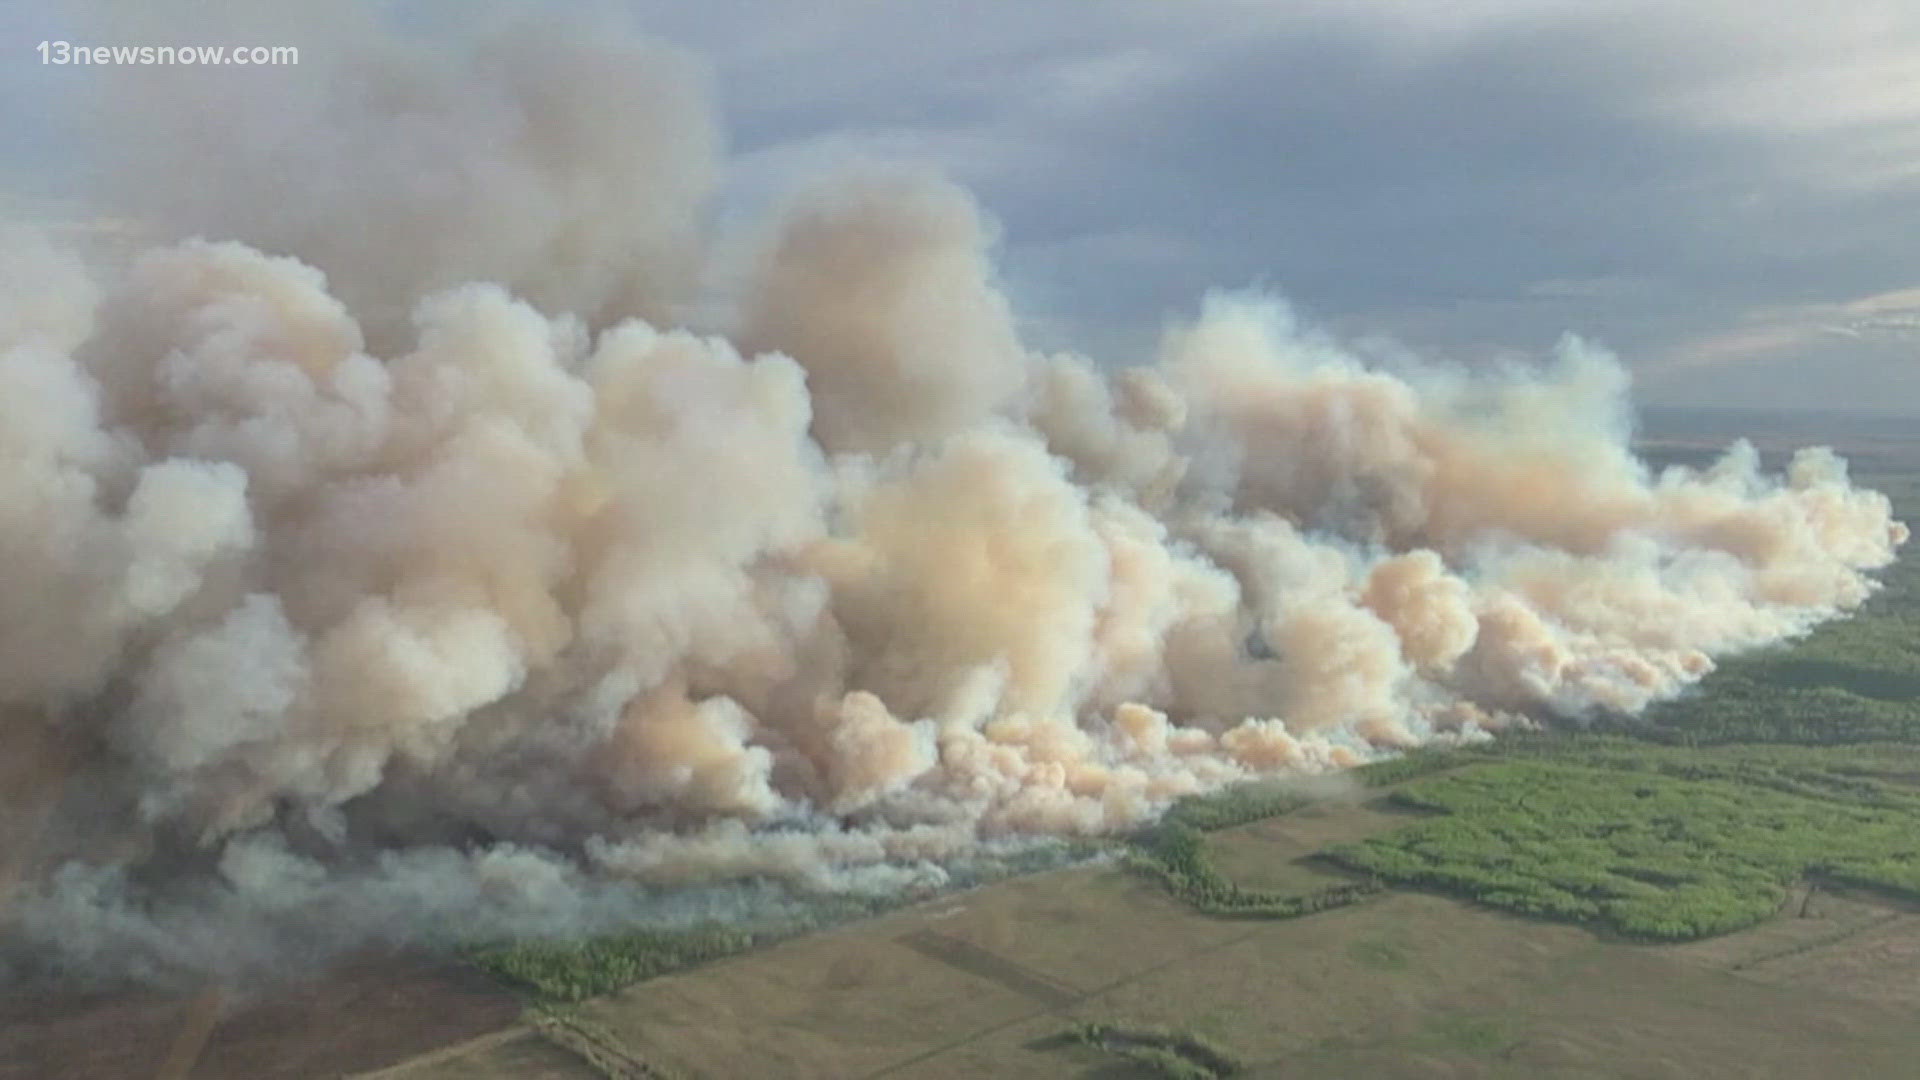 Firefighters are working to tame more than 100 active fires. Minnesota's air is considered unhealthy today and more states are on alert as well.